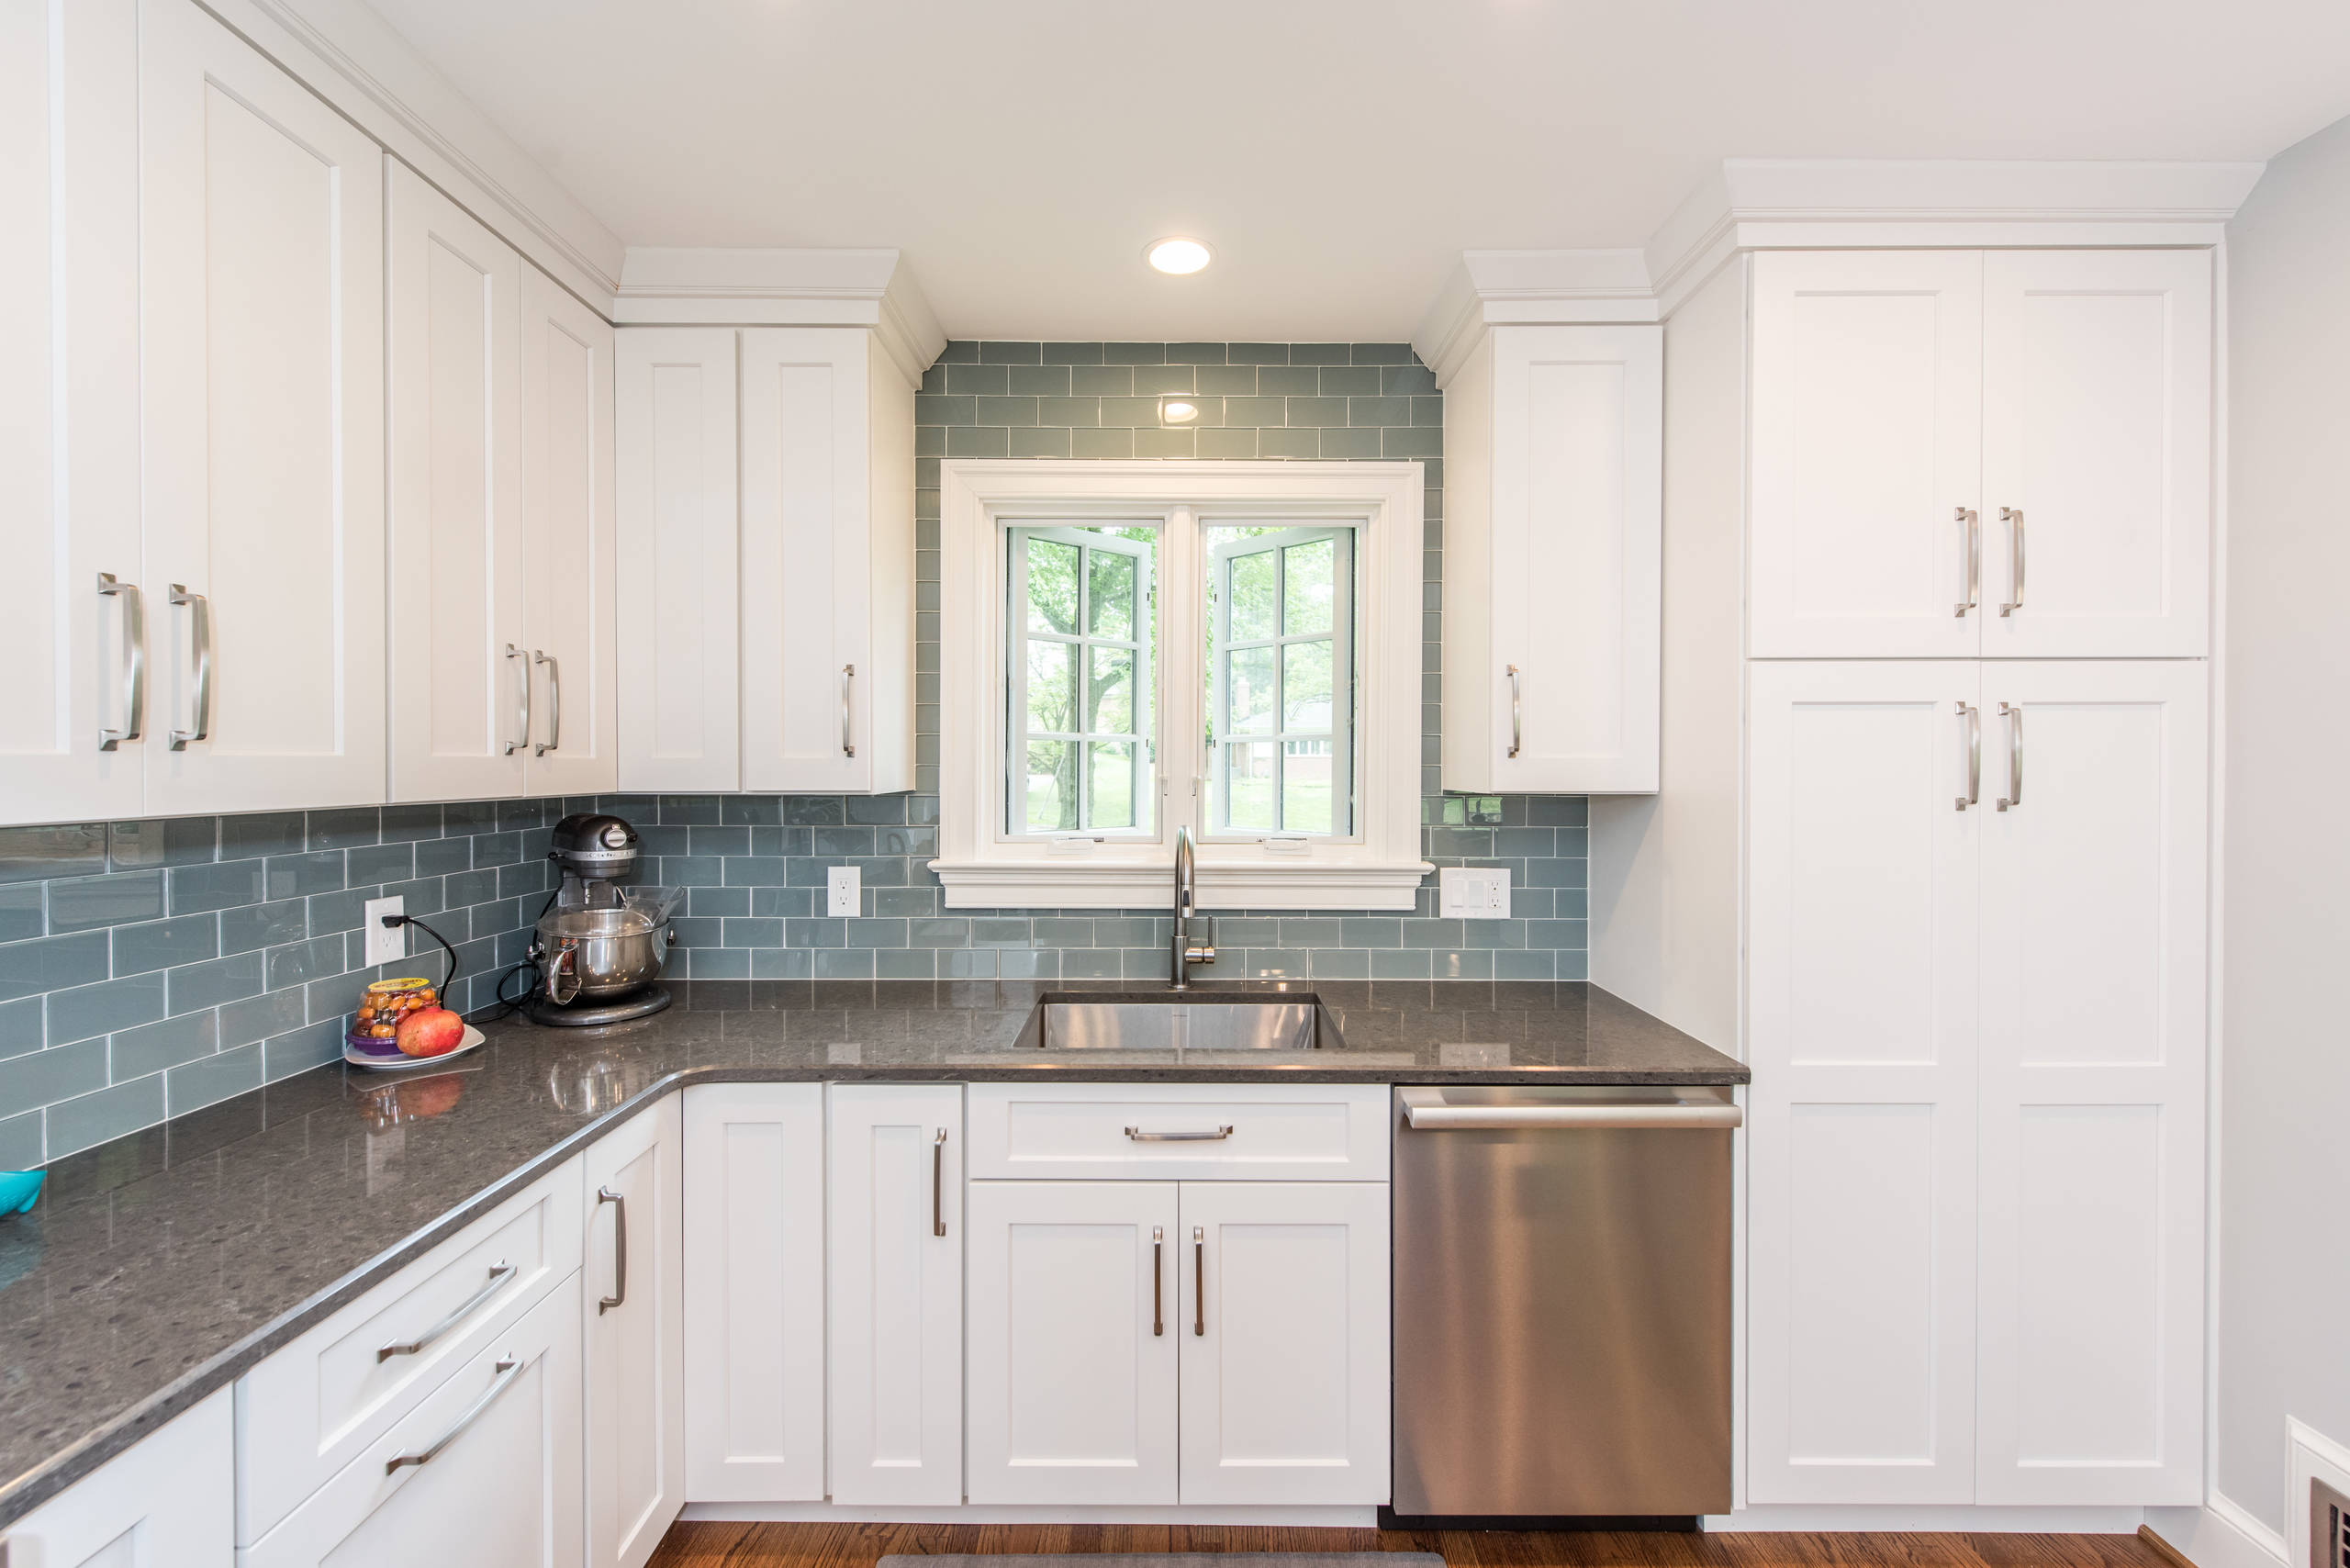 Kensington, MD Eclectic Kitchen and Bath Remodel